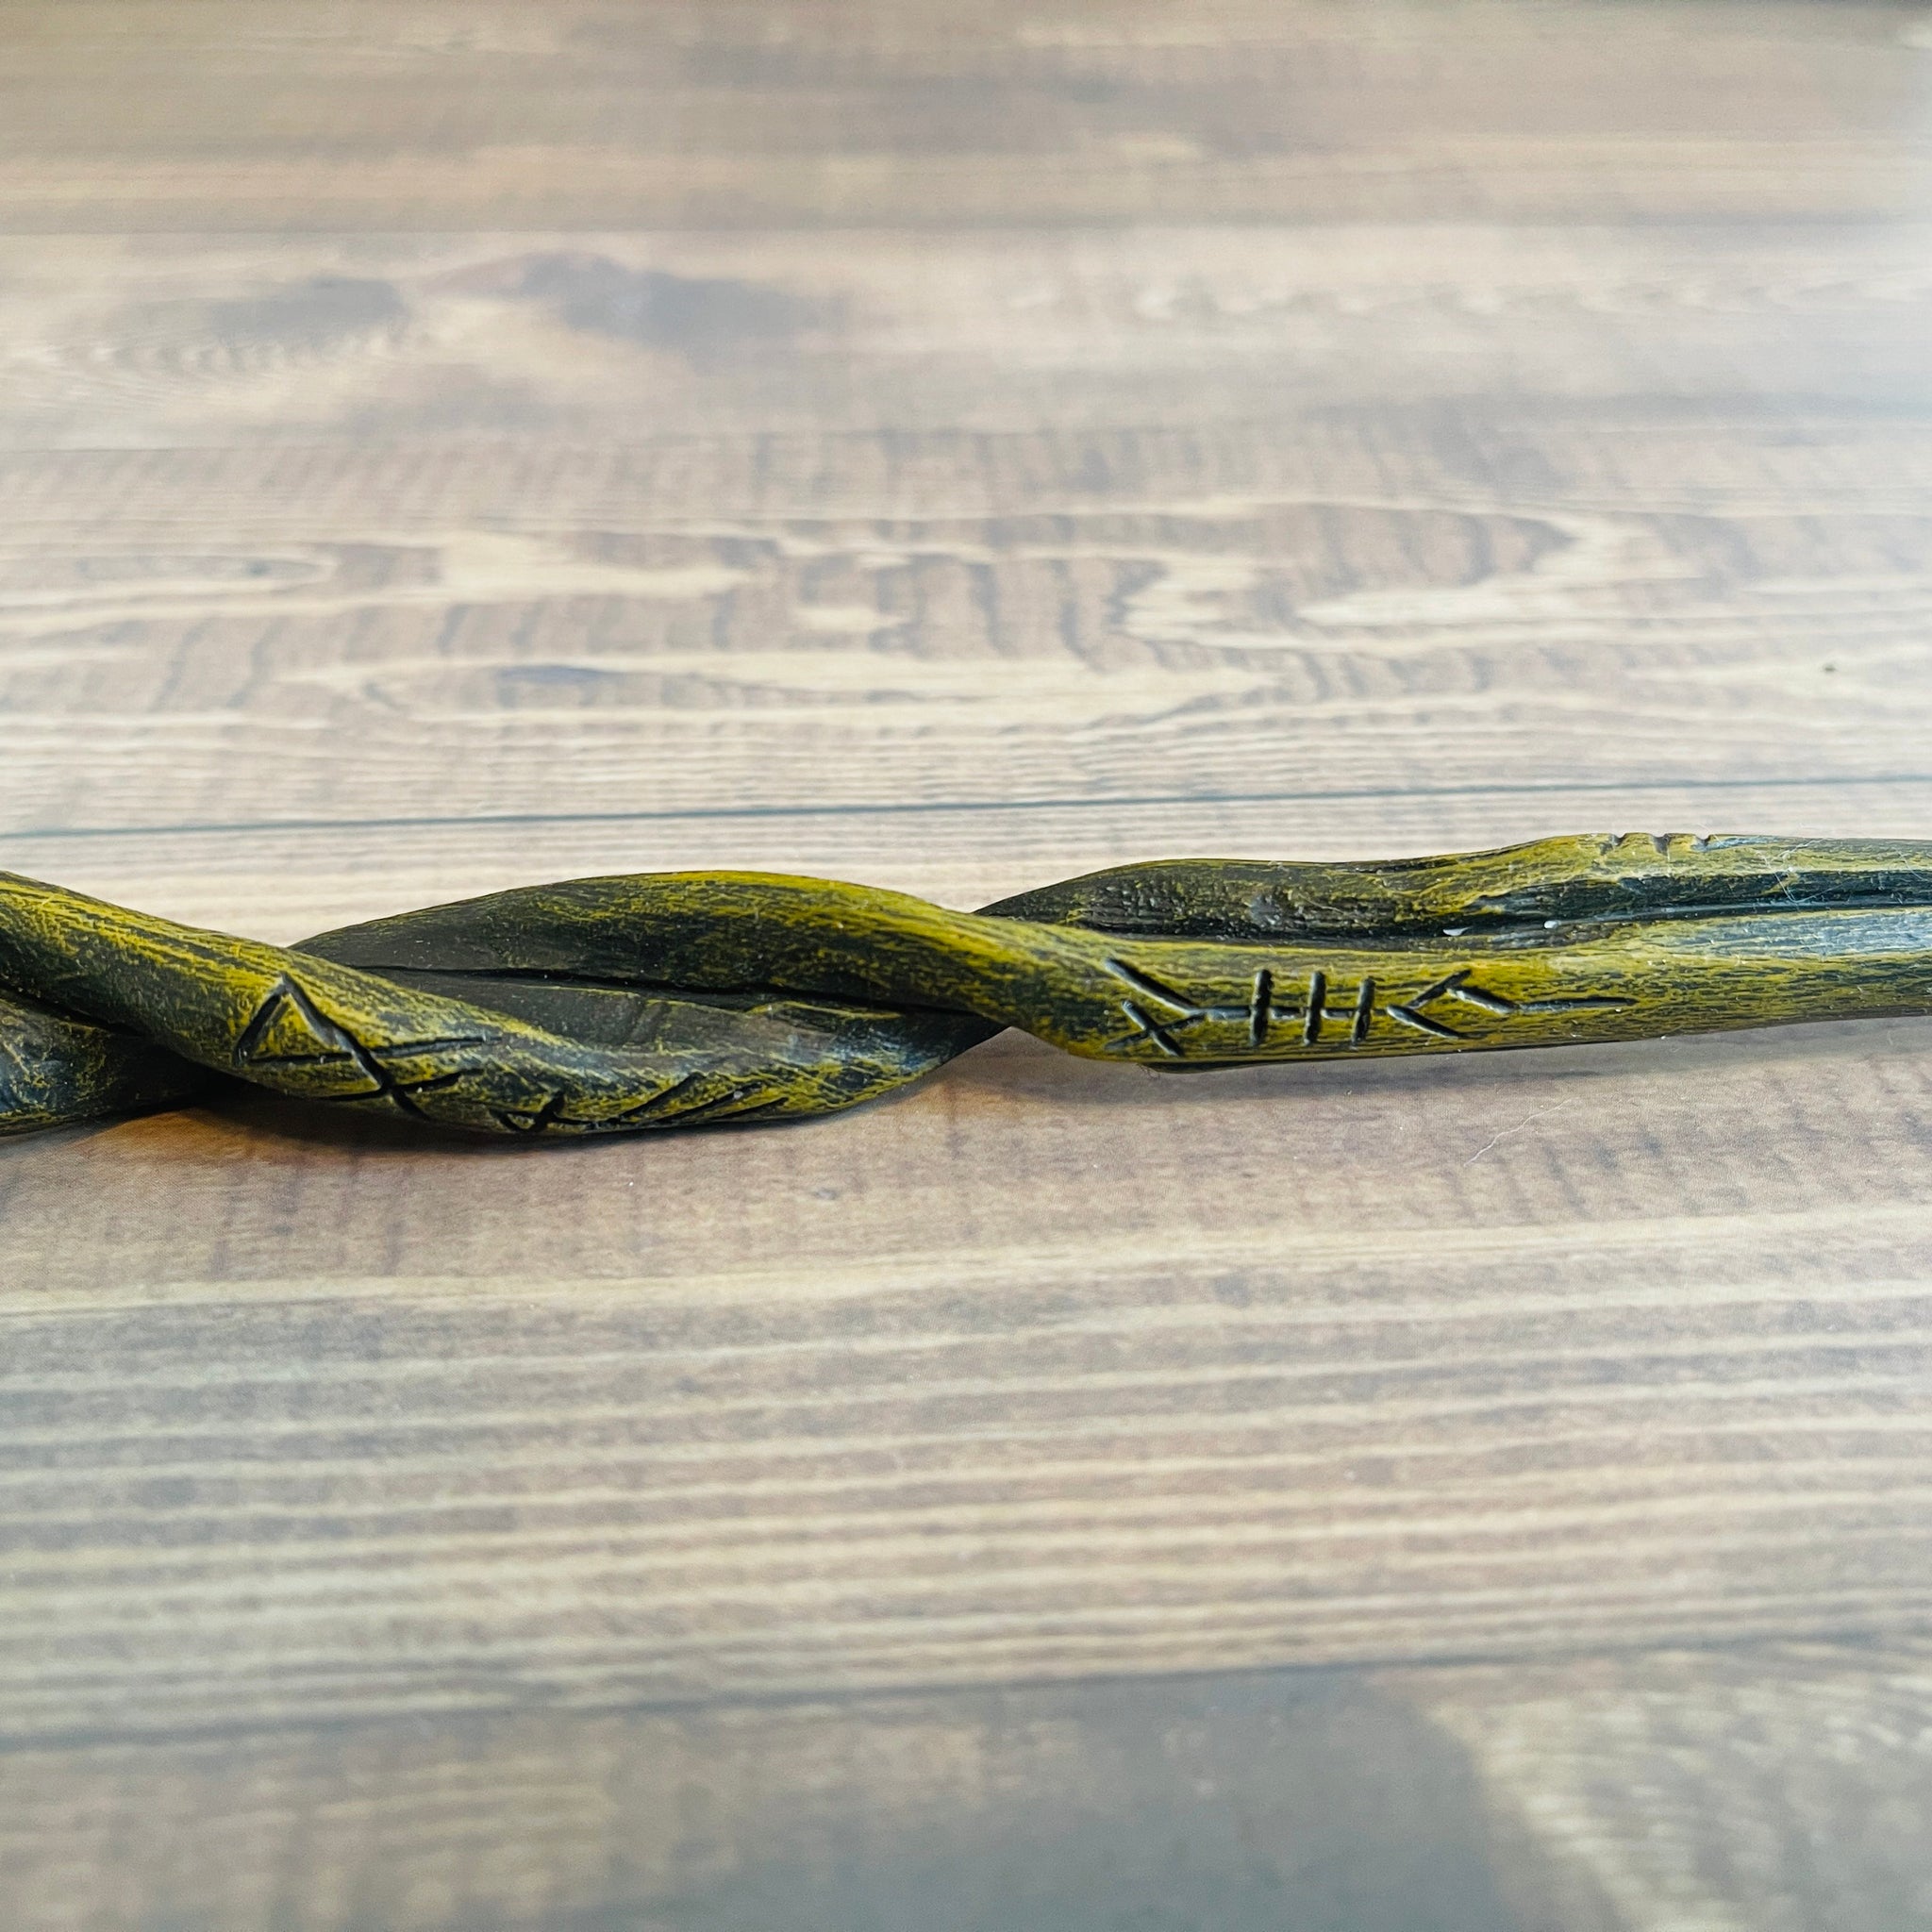 Stormforged Willow Wand ---> SALE!!!!<---